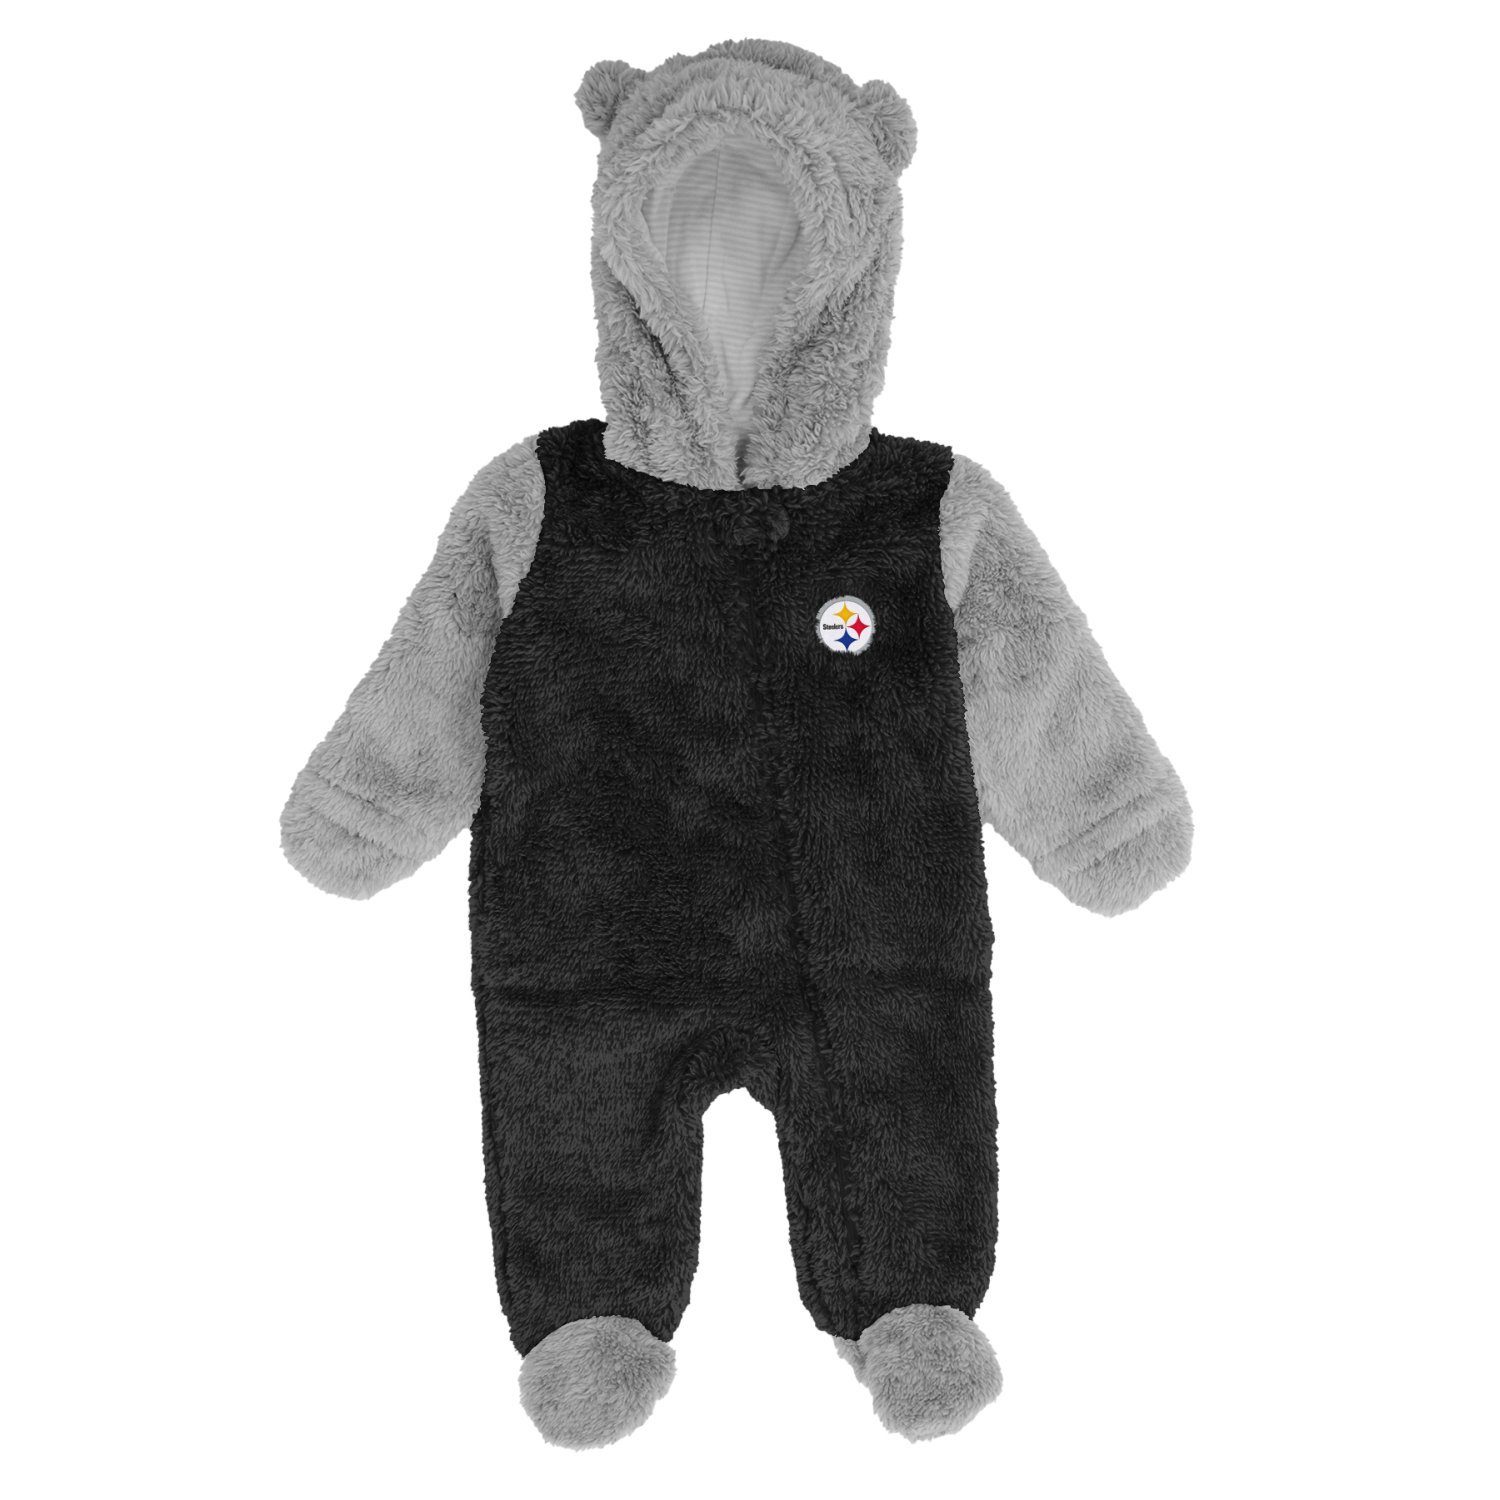 Overall Kapuzenpullover Pittsburgh NFL Steelers Outerstuff Teddy